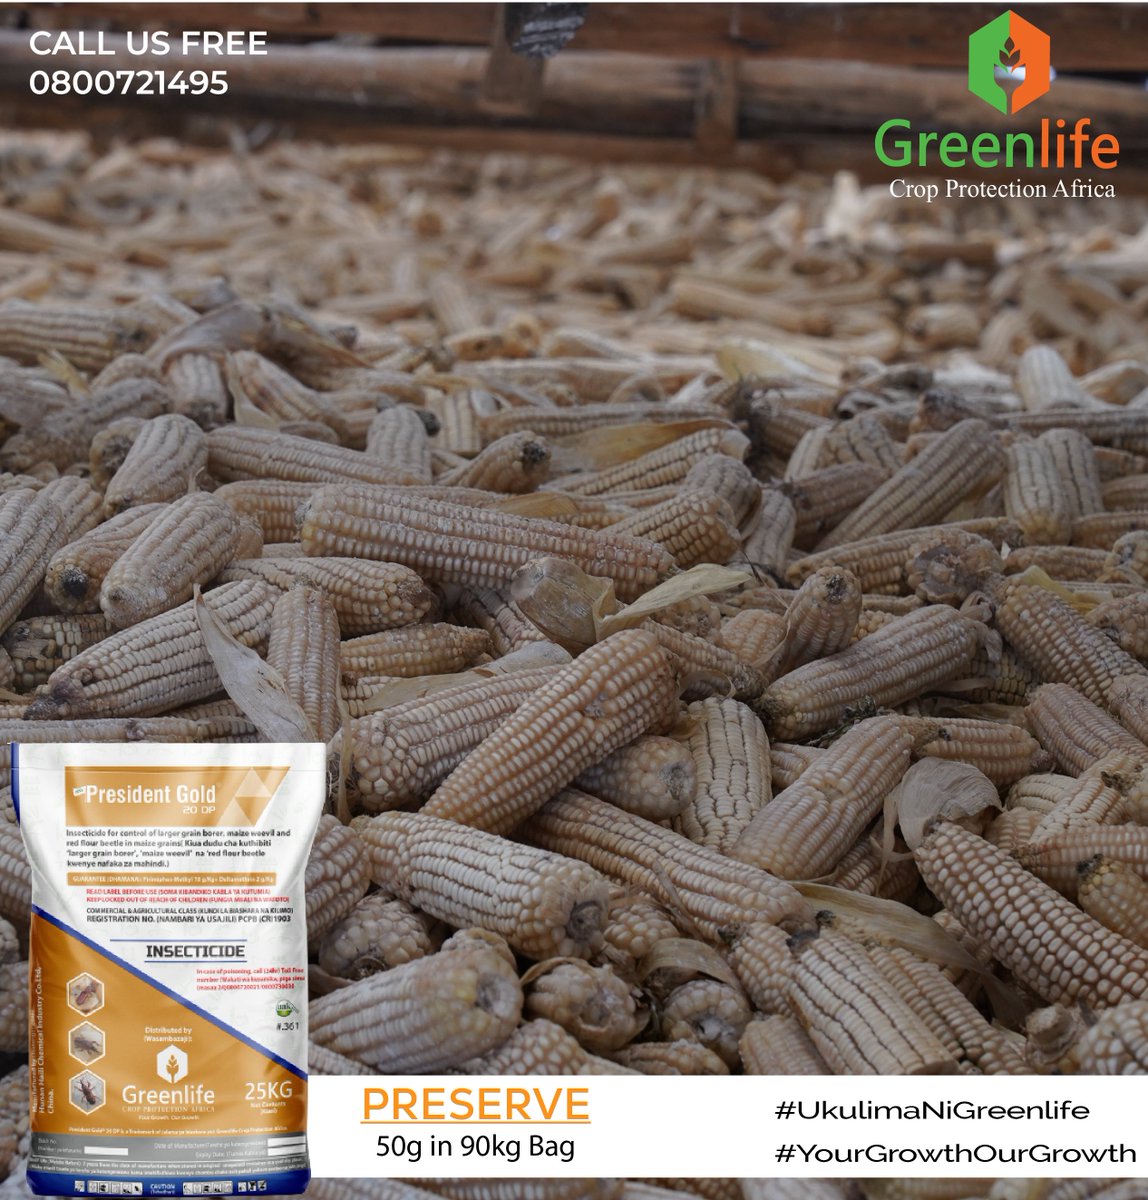 MAVUNO IKIWA BORA UNATUMIA DAWA ILIYO BORA ZAIDI... This is where it begins. President Gold 20DP guarantees you constant quality all through. Call us now to place your order at no cost. 0800721495 #UkulimaNiGreenlife #YourGrowthOurGrowth